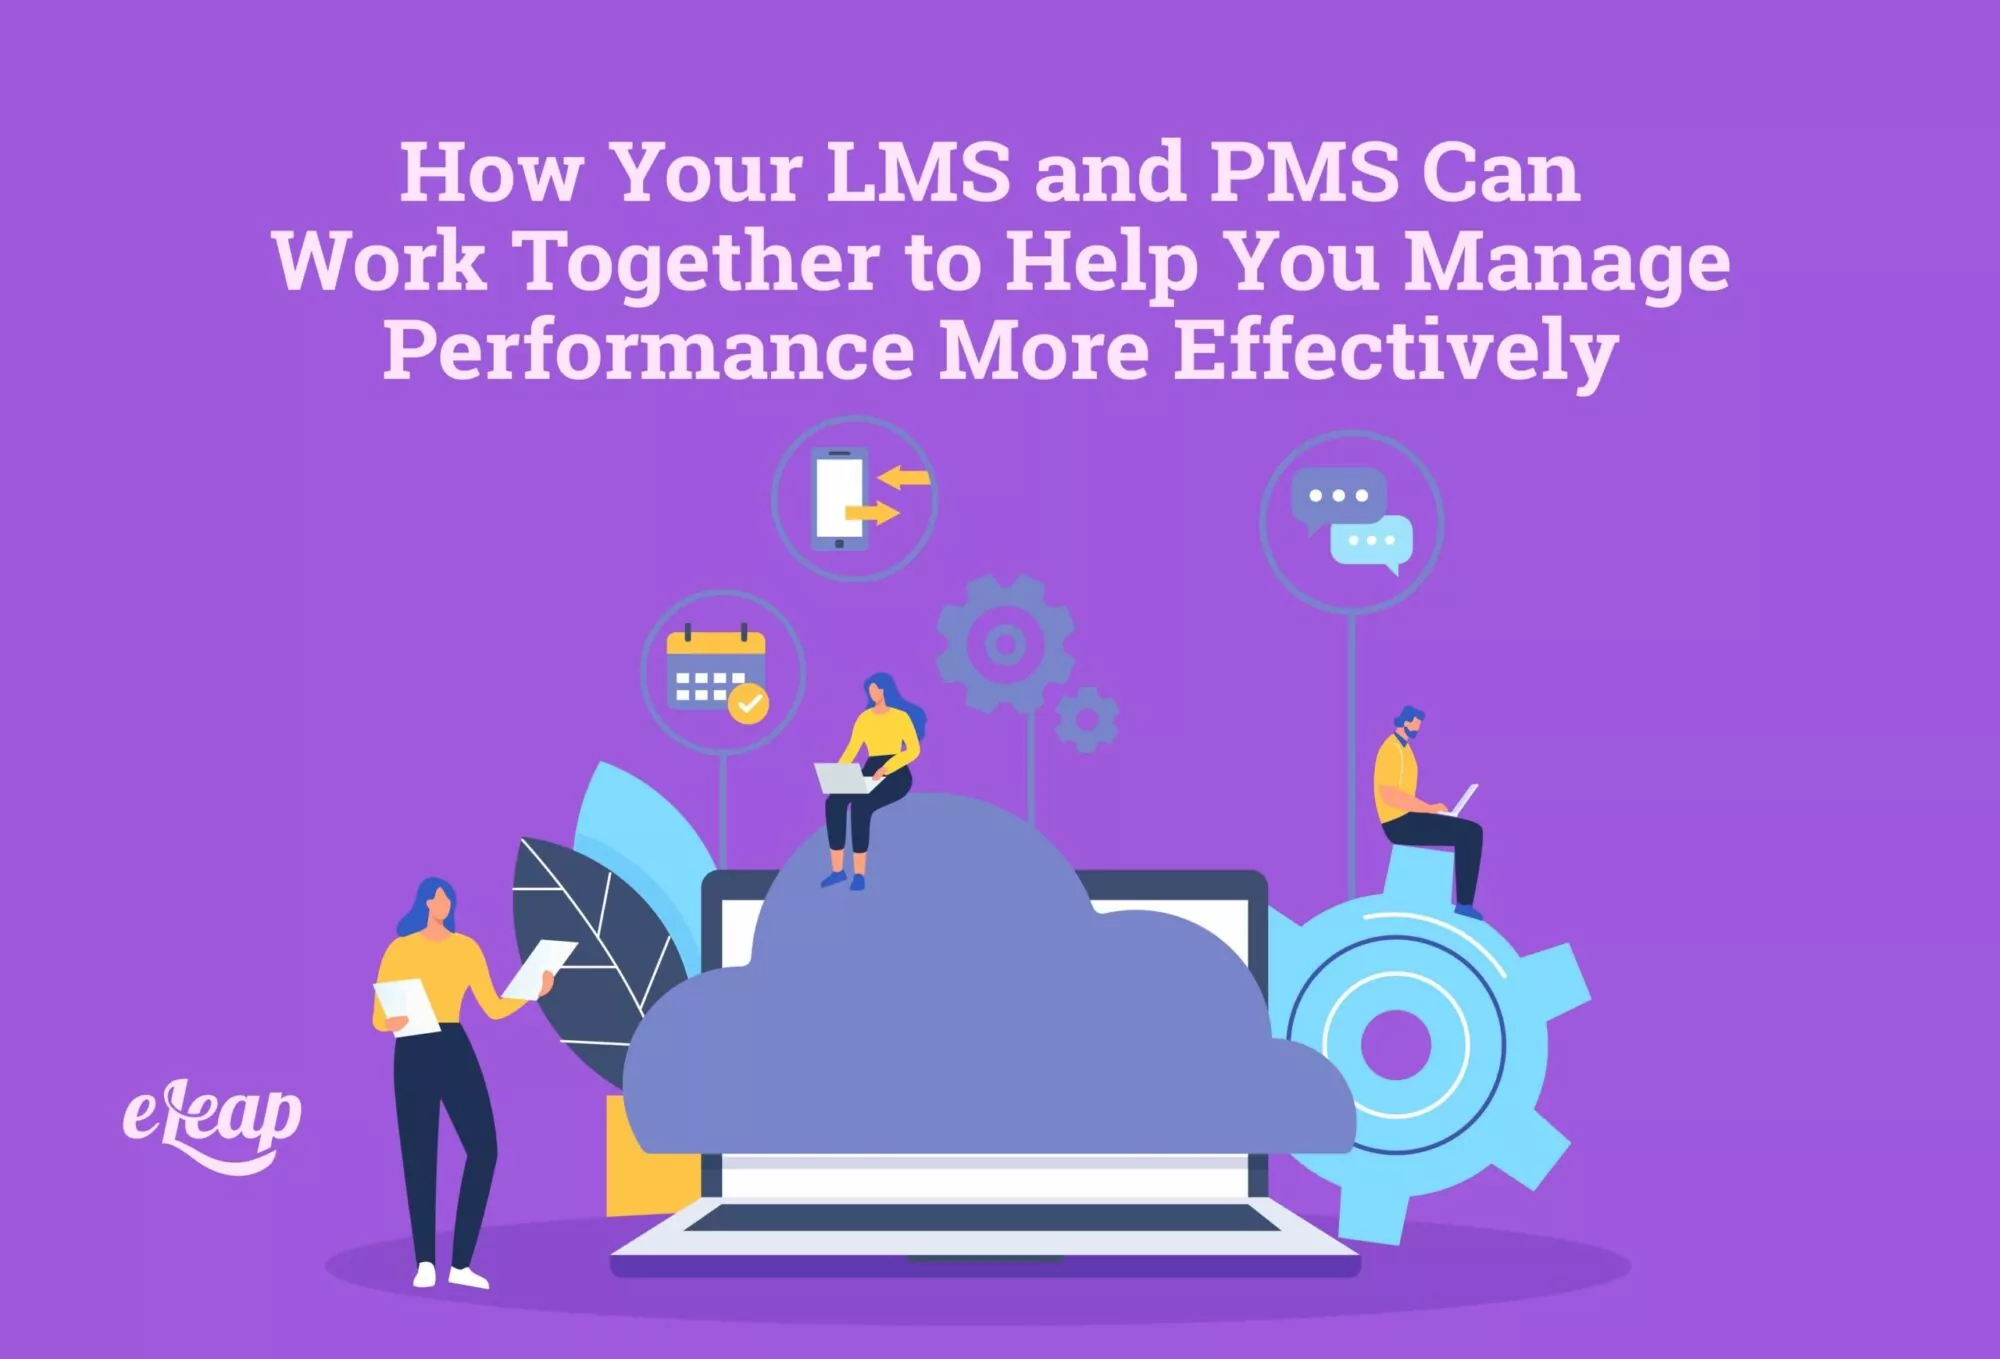 How Your LMS and PMS Can Work Together to Help You Manage Performance More Effectively